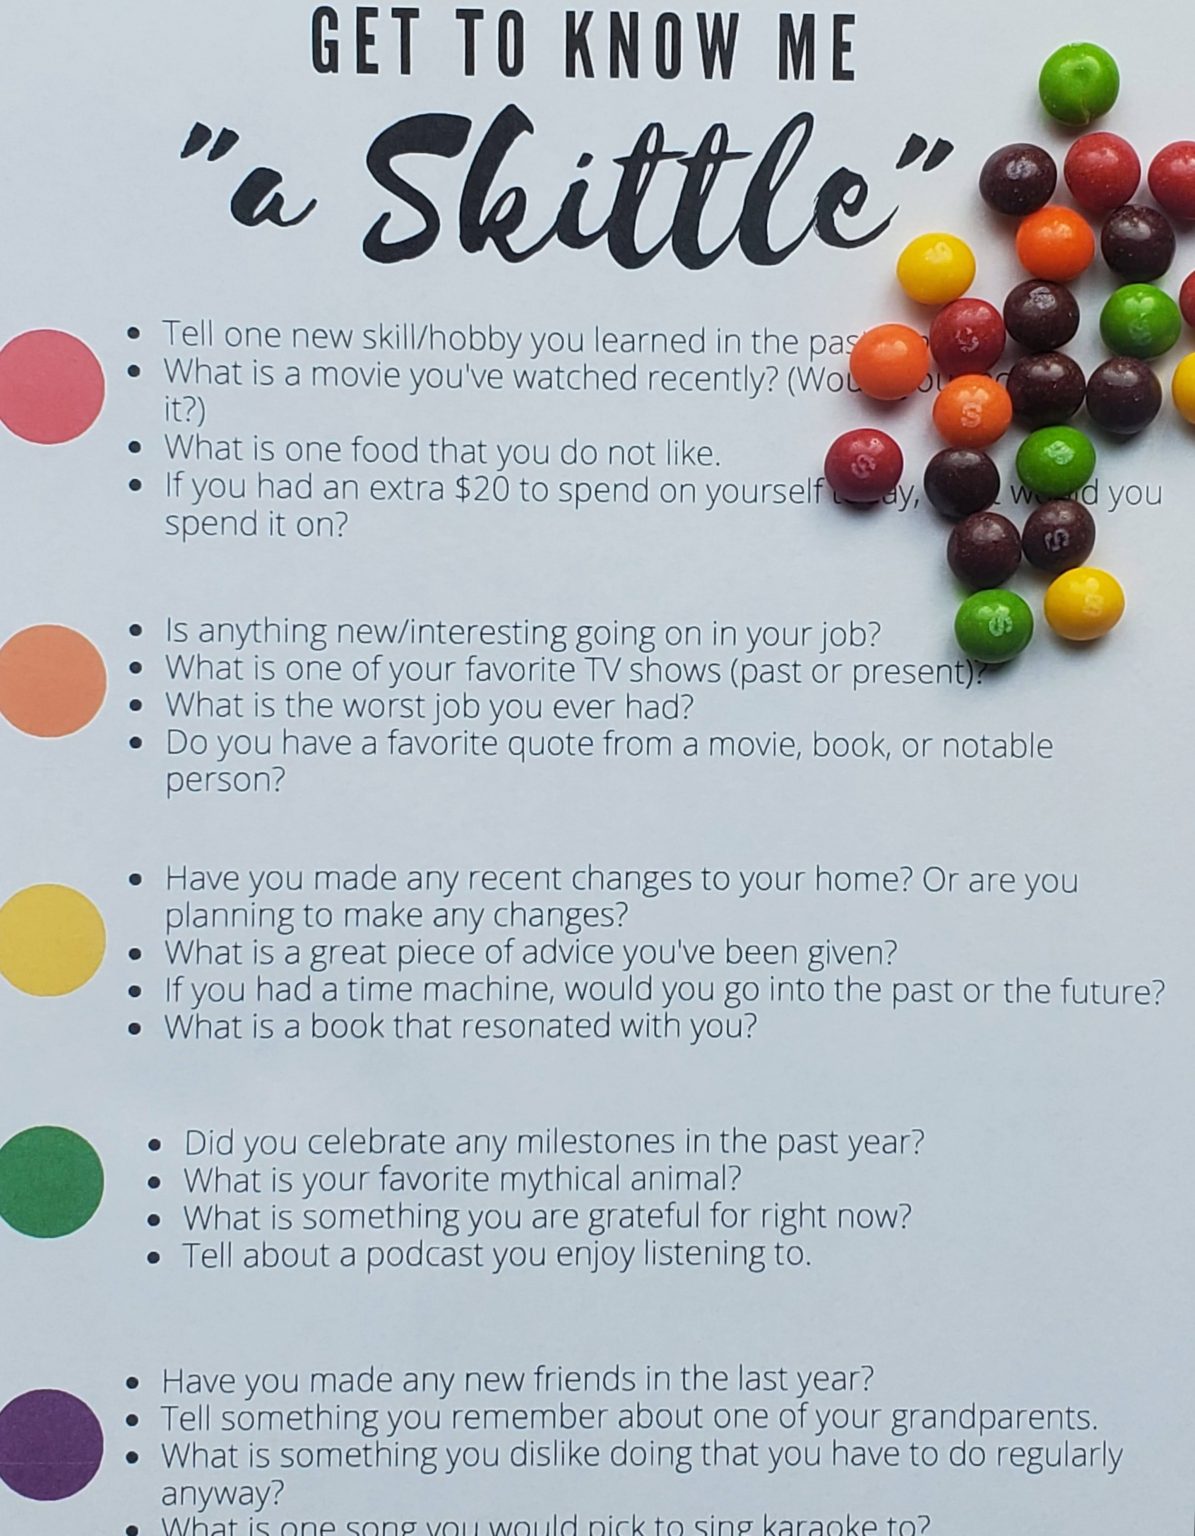 use-these-questions-to-break-the-ice-a-skittle-an-easy-ice-breaker